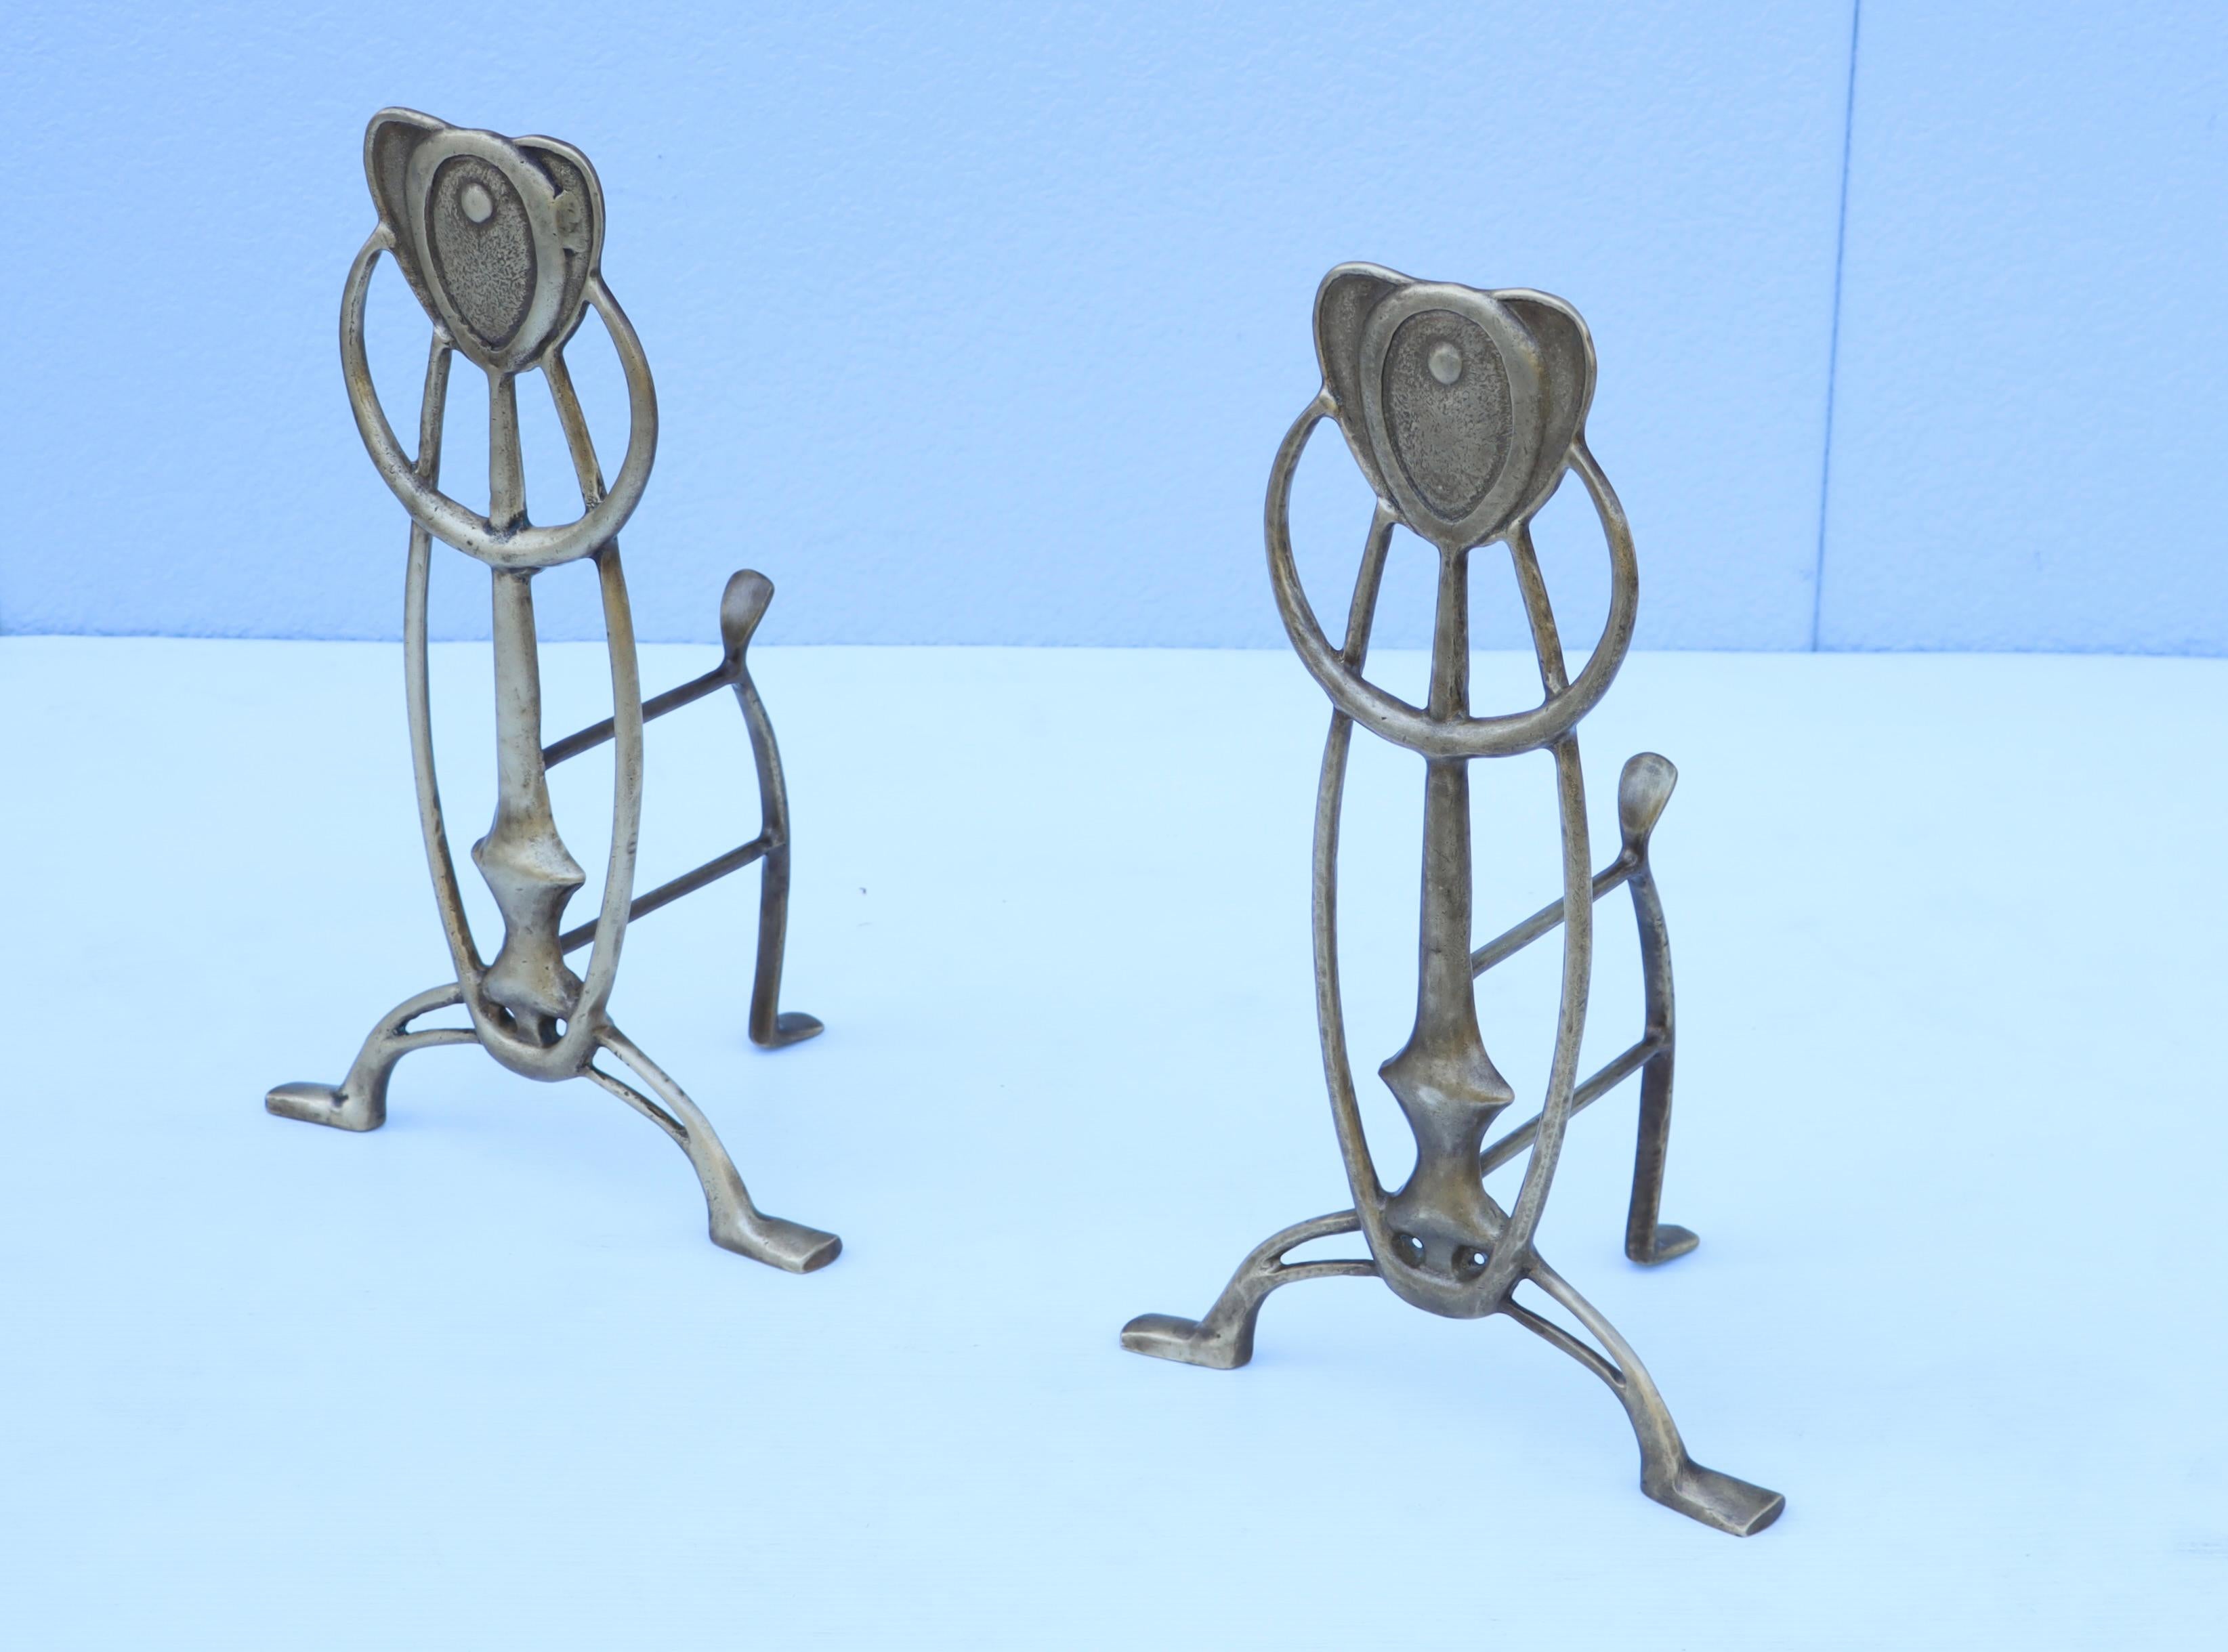 Nice pair of 1960's solid brass animal abstracts andirons, in vintage original condition, with minor wear and patina due to age and use lightly hand polished.